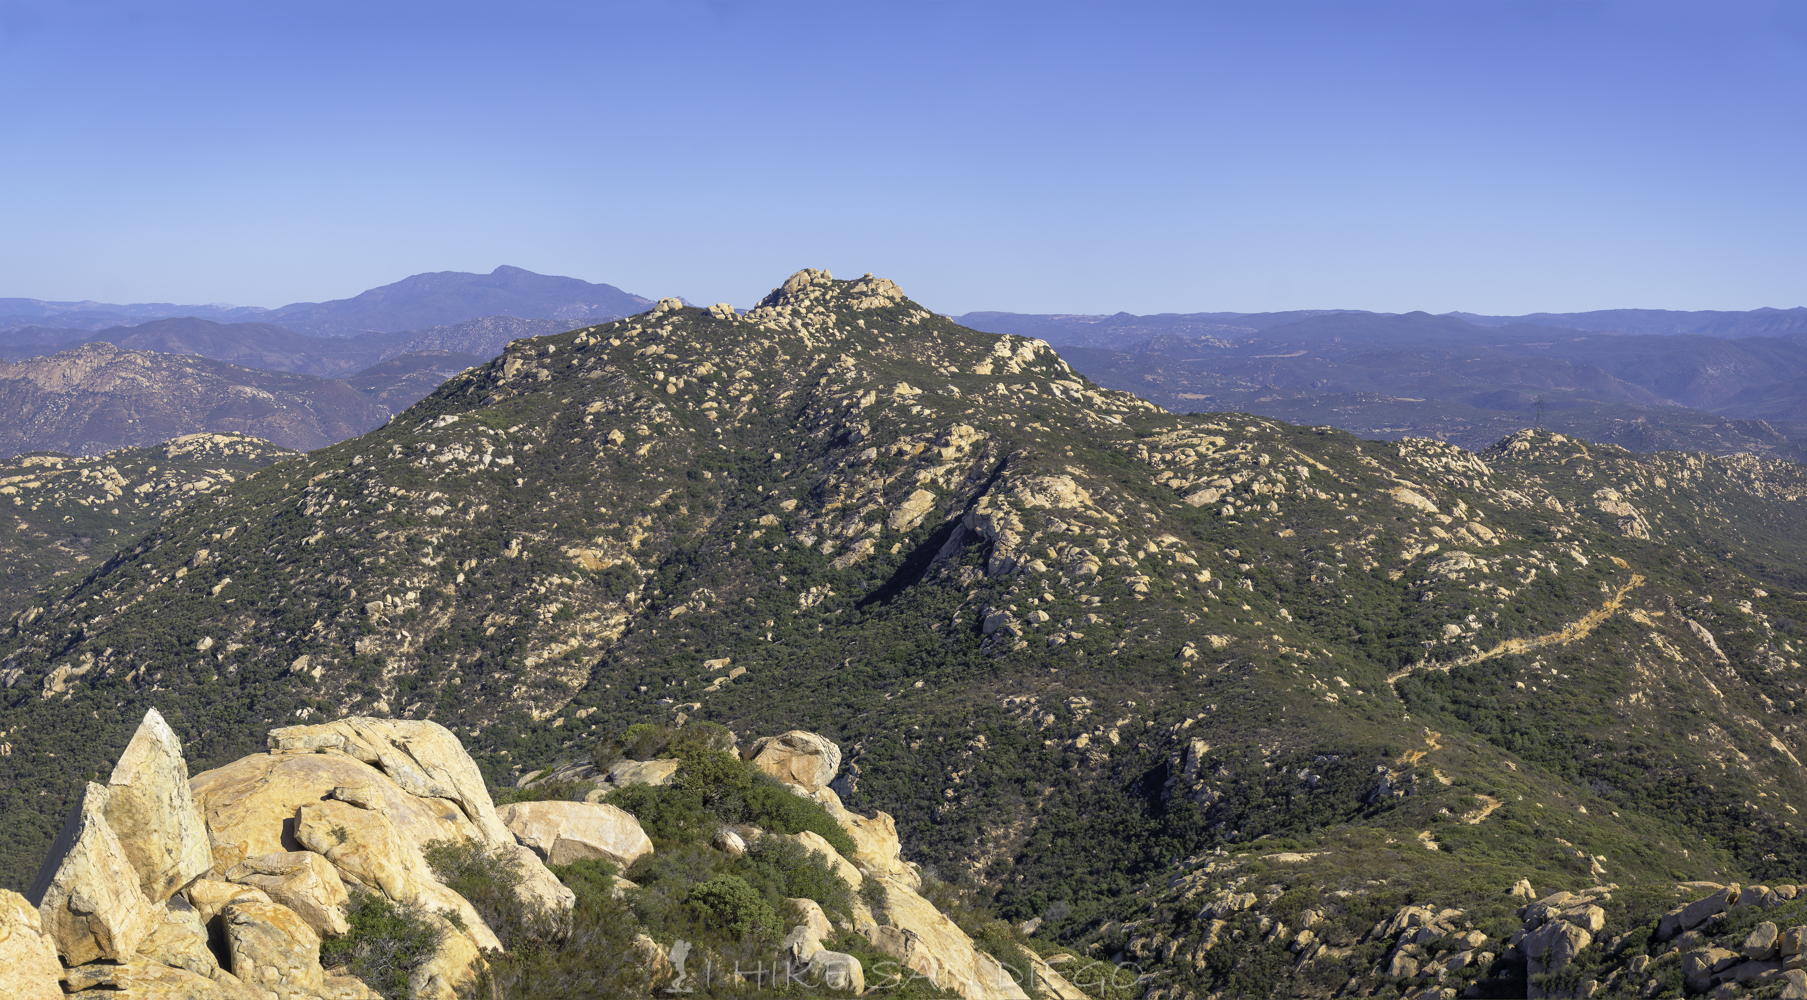 Looking towards Gaskill Peak with Cuyamaca Peak behind and to the left. 